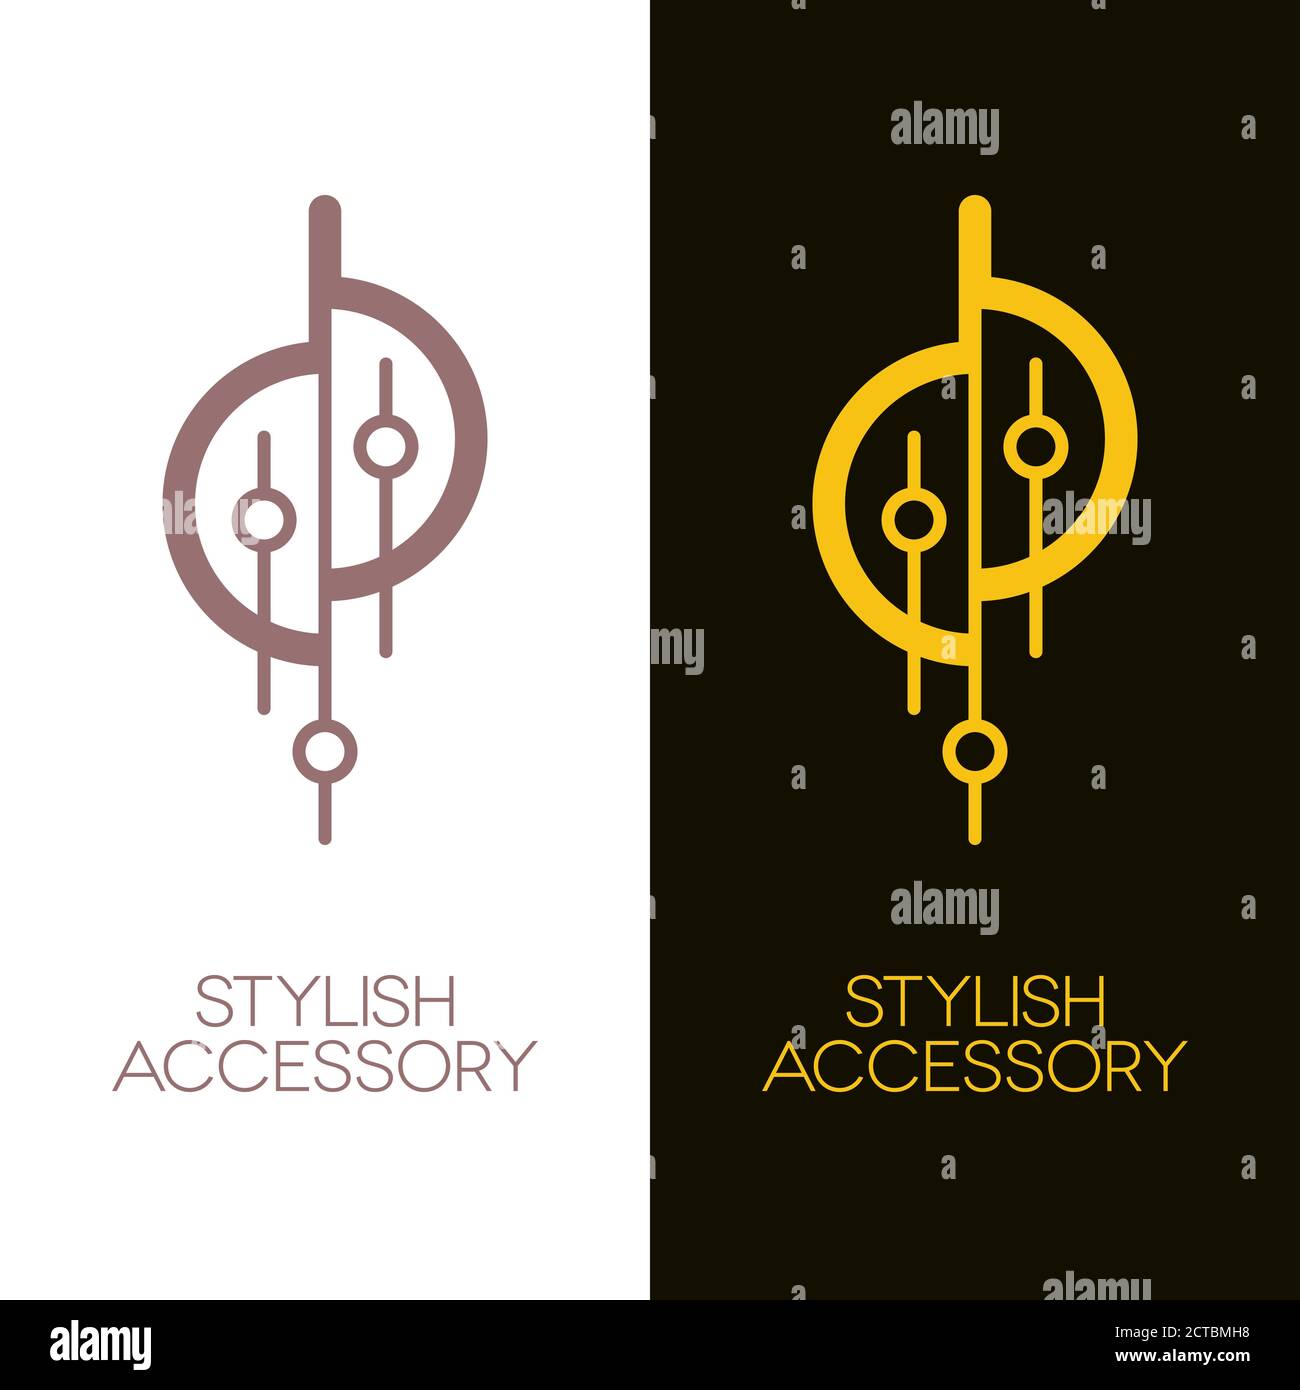 Ornate decorative accessories or jewelry icons such as necklace, earring or lighting equipment. Gold and bronze vector logos. Stock Vector